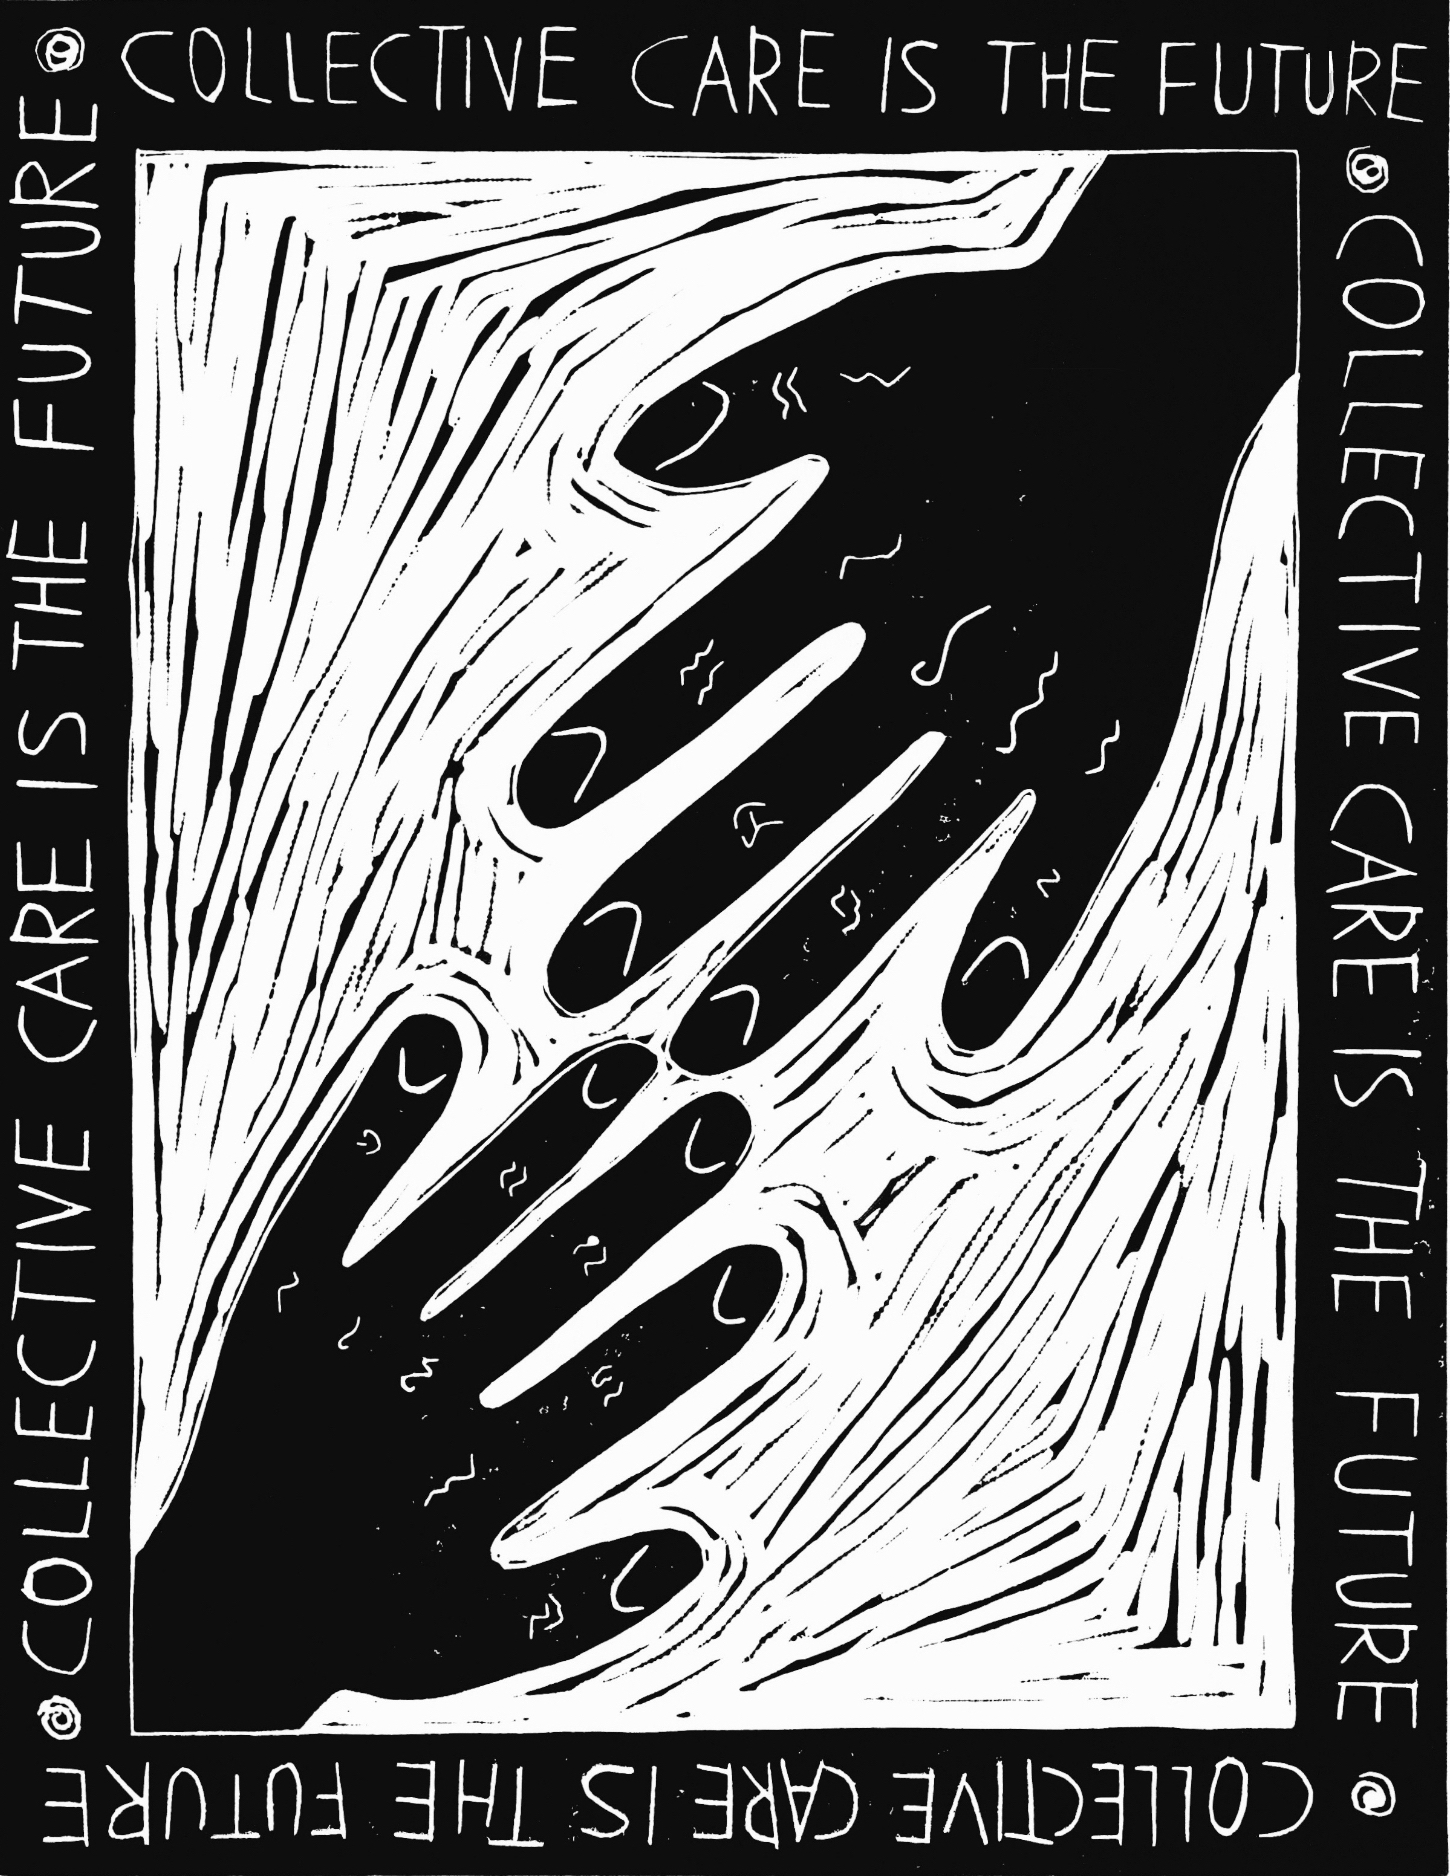 A black and white linocut print in portrait format has a thick black border containing the words repeating on all four sides: â€œCOLLECTIVE CARE IS THE FUTUREâ€. Inside the border are two hands in black ink coming from the bottom left and top right corners, reaching into the centre. Around the hands are small black lines and marks left by the lino cutting process.